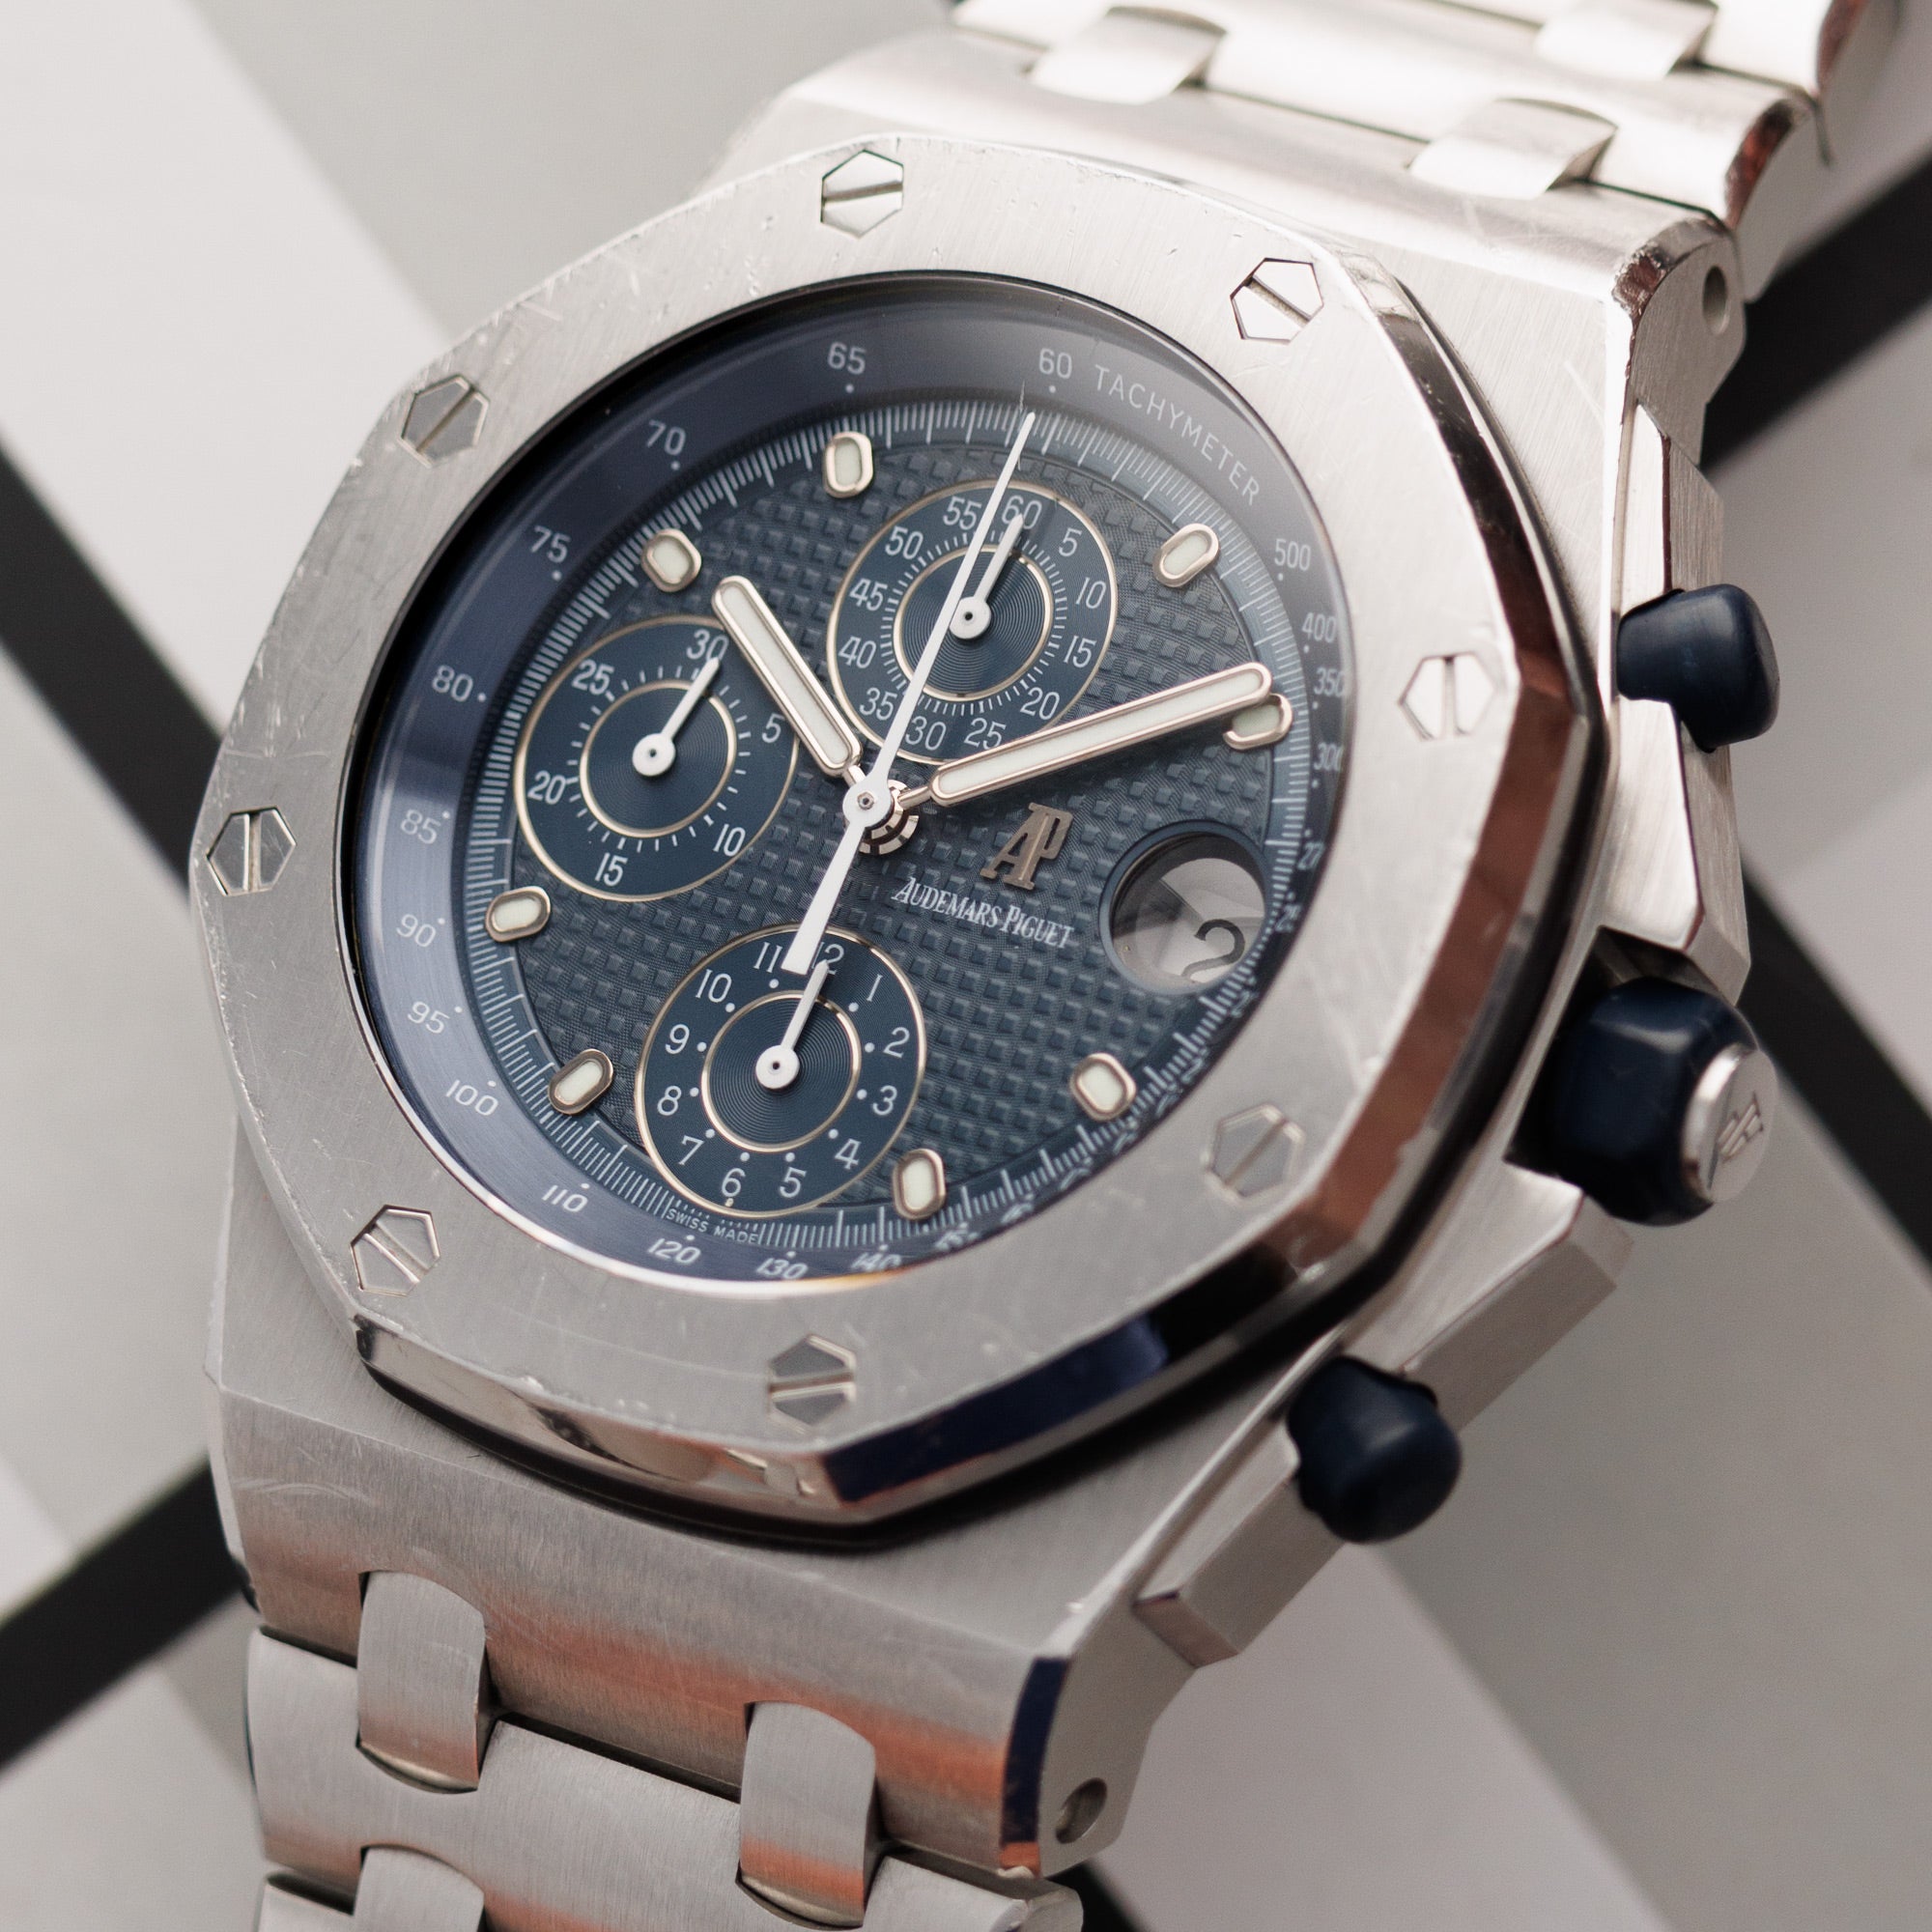 Audemars Piguet Steel The Beast Royal Oak Offshore Chronograph Ref. 25721 with Certificate